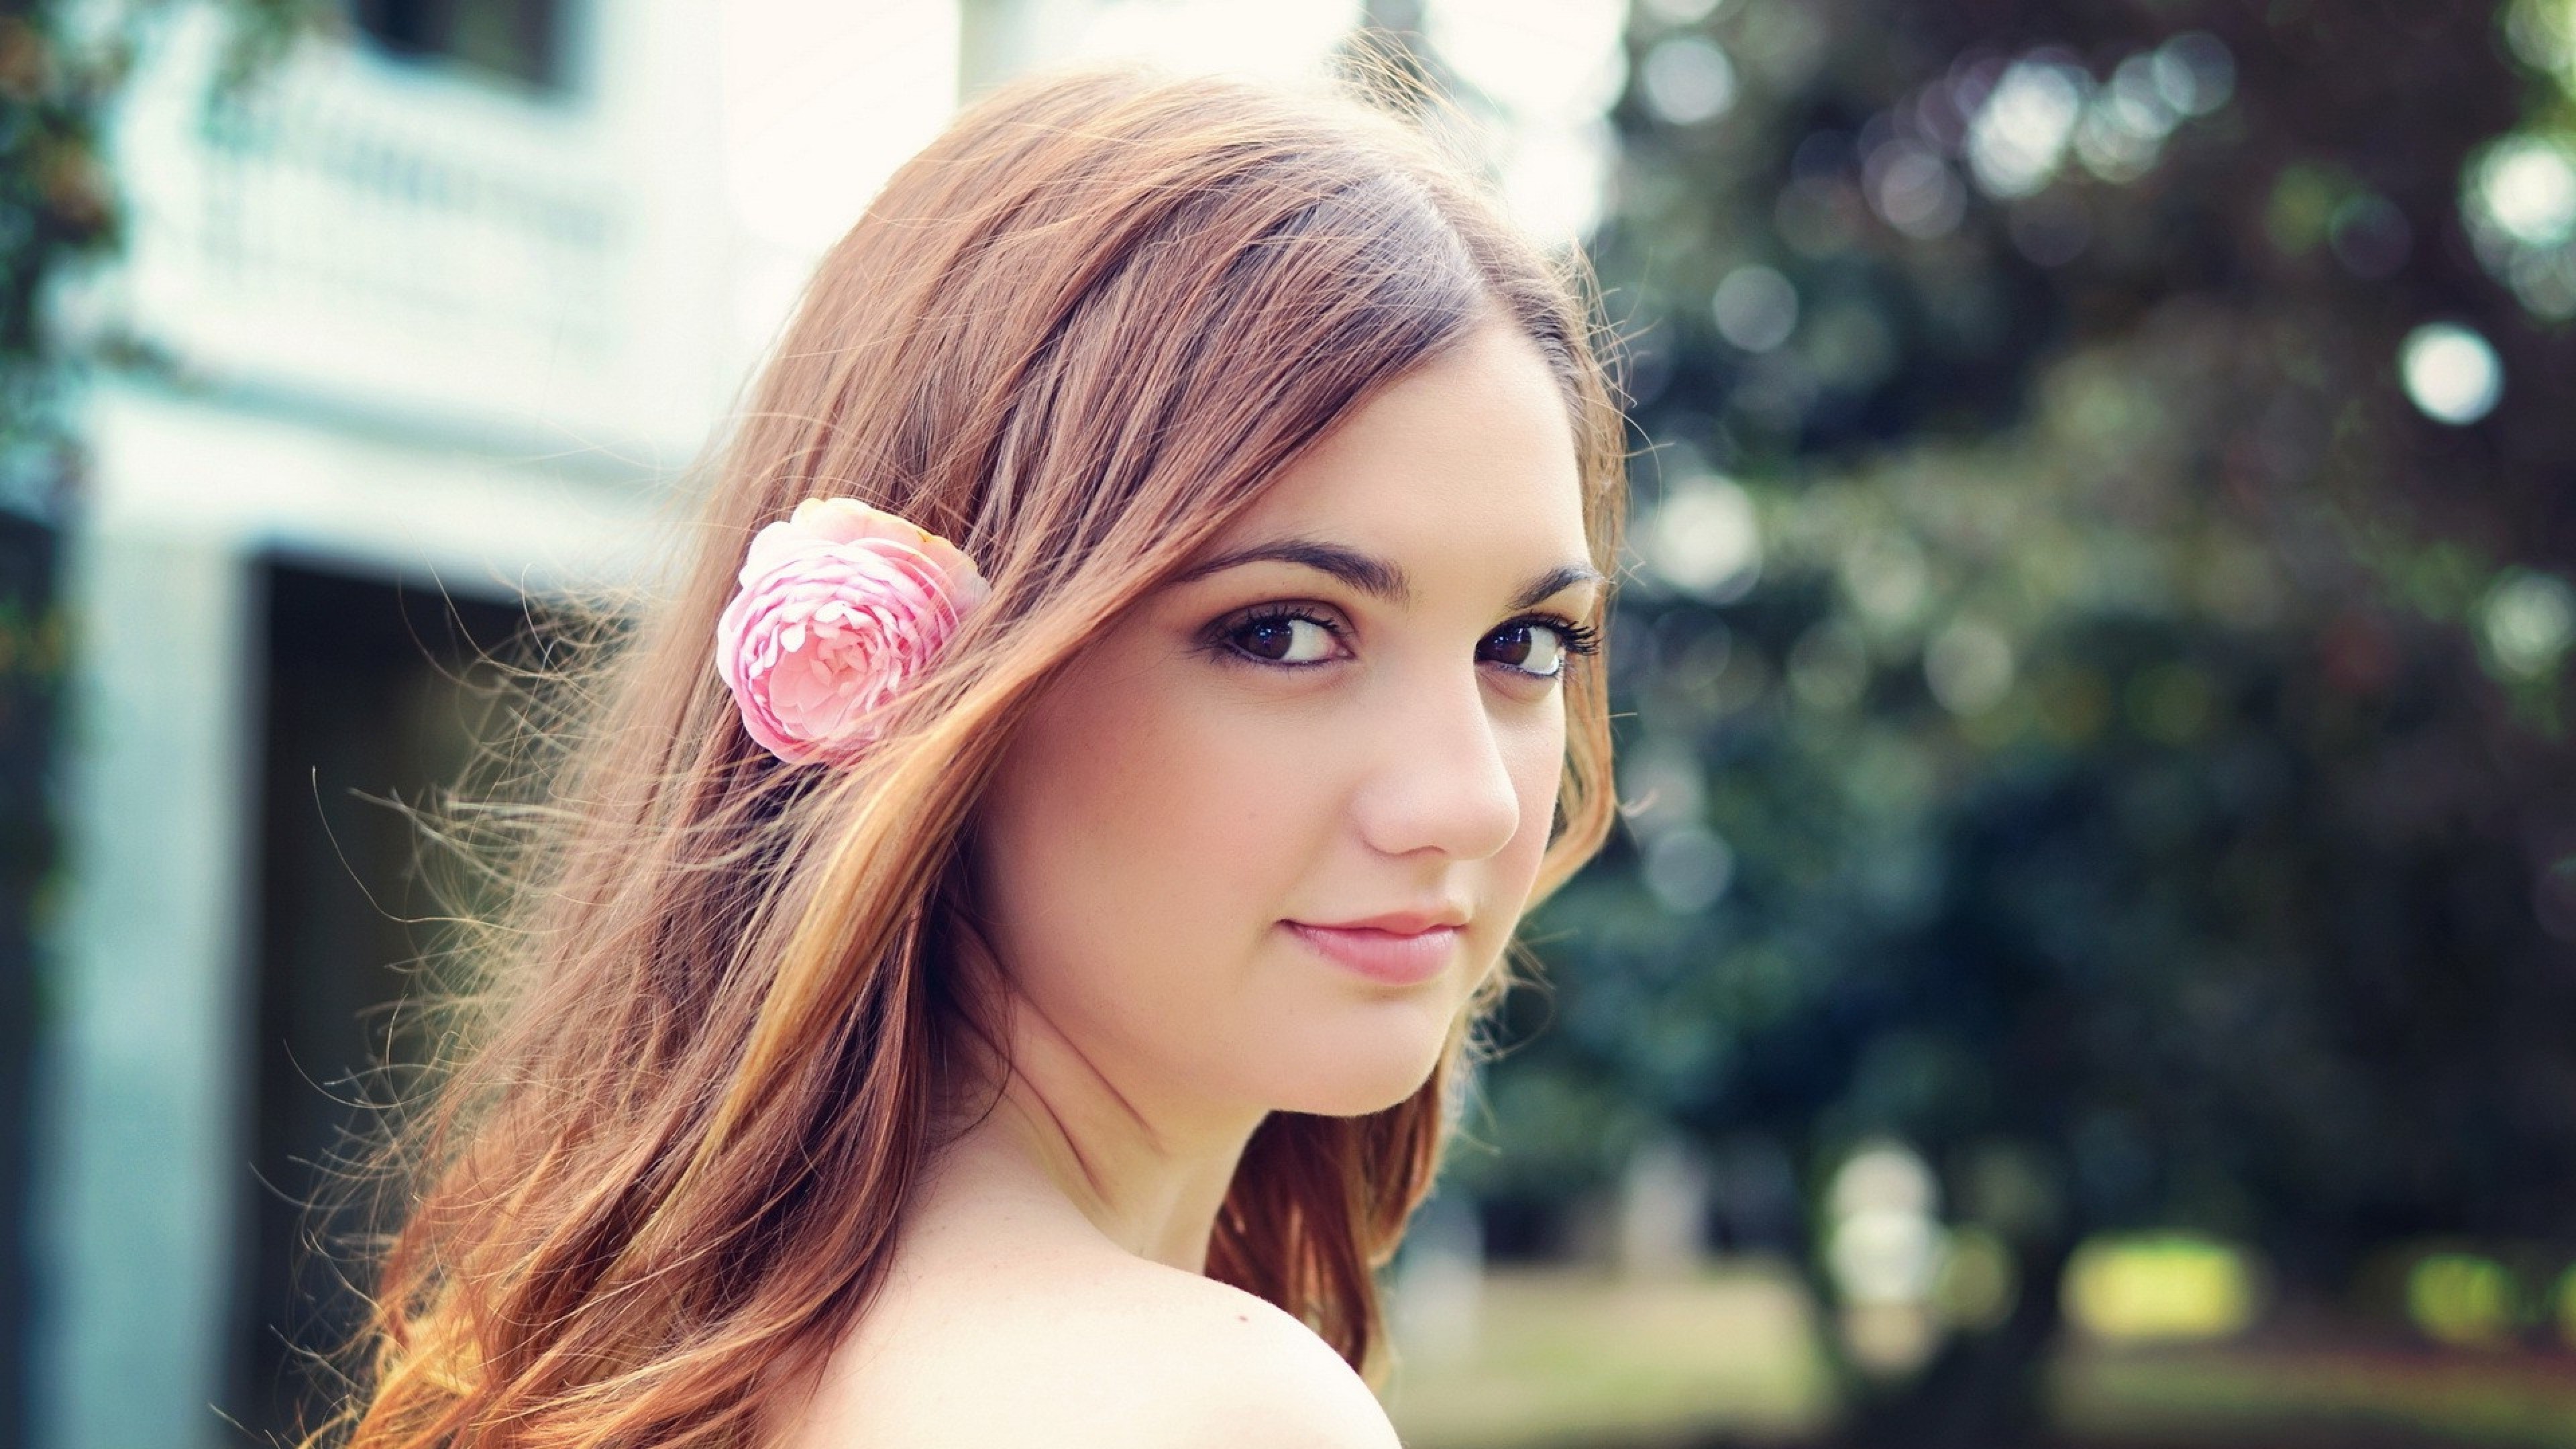 Free photo Portrait of a girl with a rose in her hair